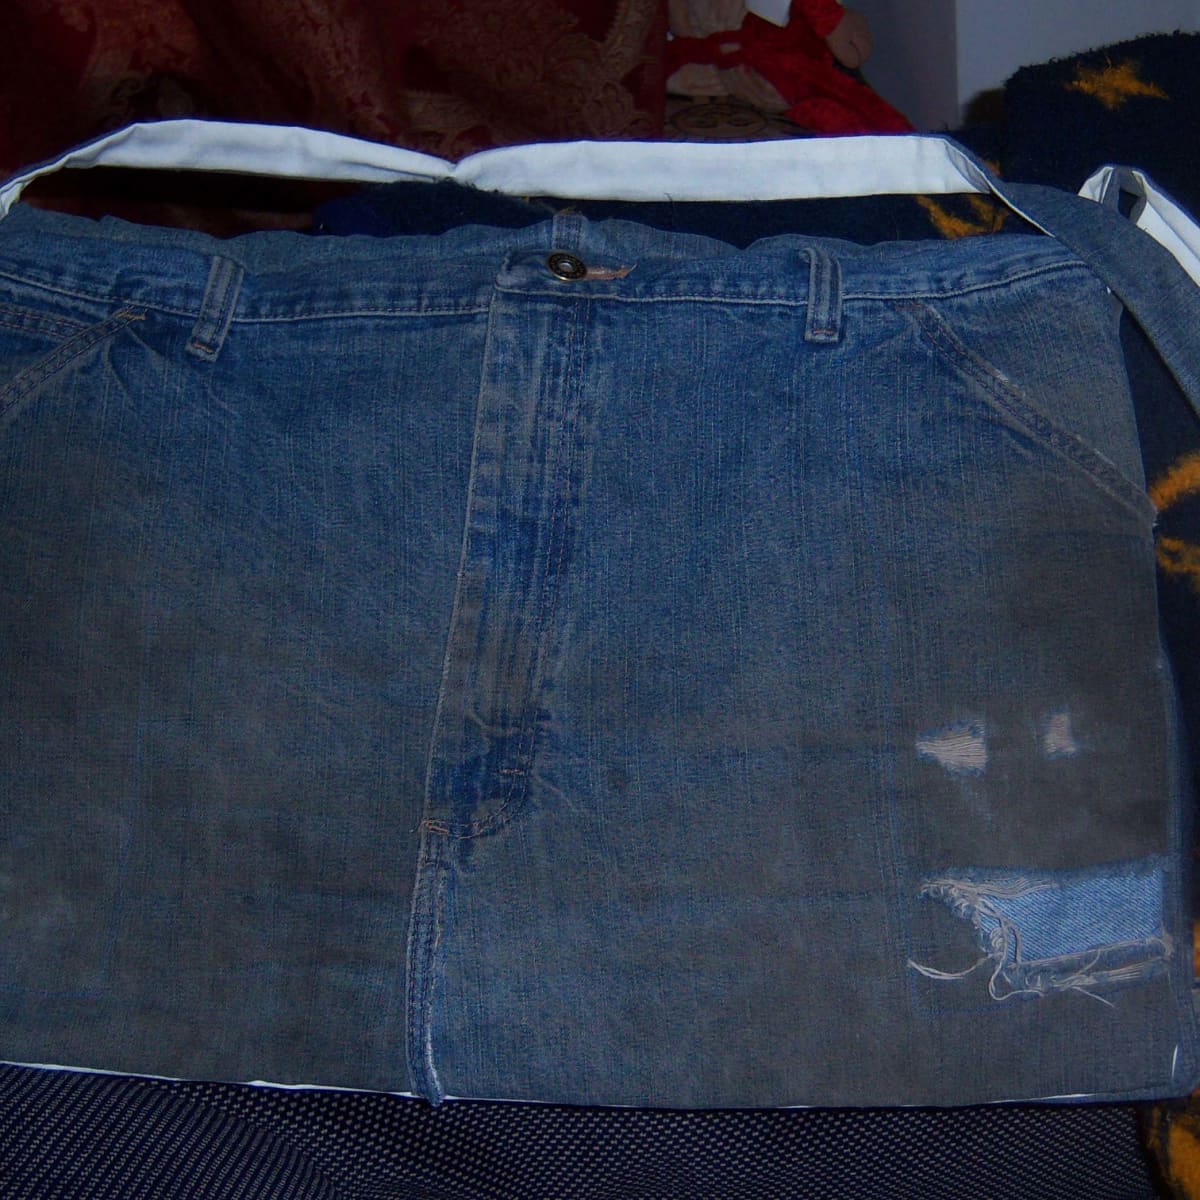 to Make a Messenger Bag out of an Old of Jeans - FeltMagnet